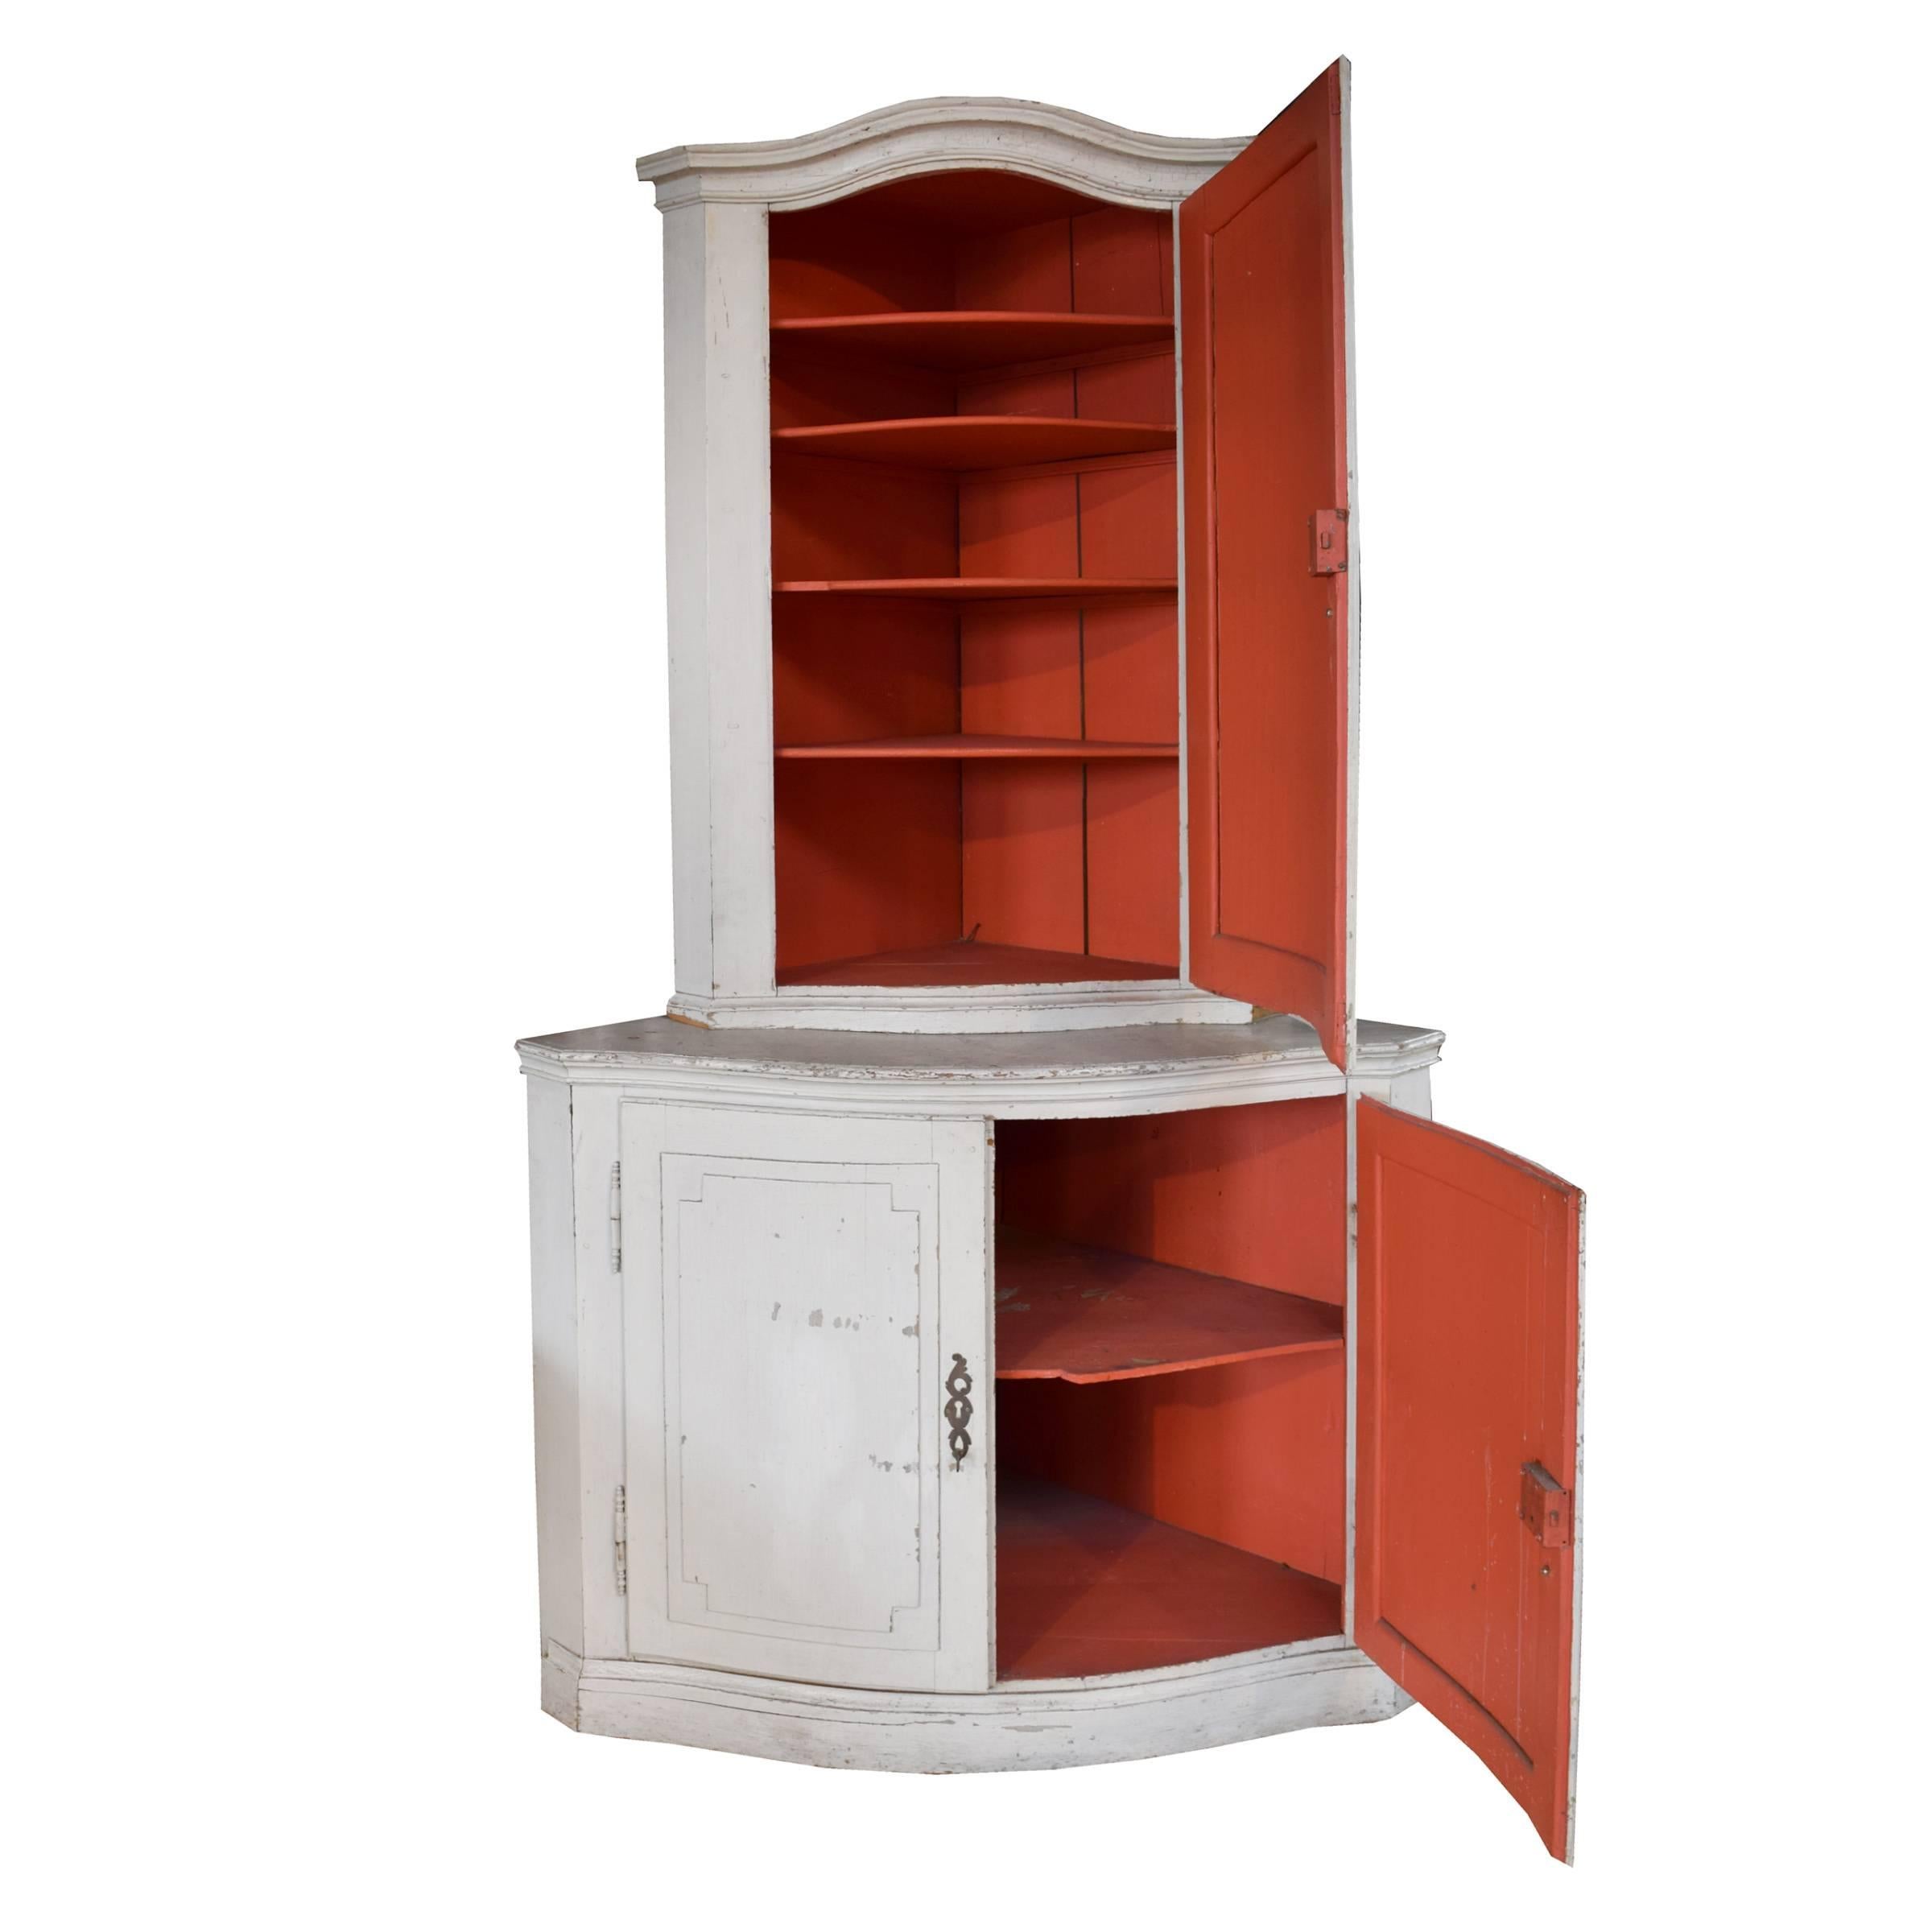 A fantastic and very old German two-tier corner cabinet with a wonderful grey chalky painted exterior and red painted interior with shelves, circa 1800.